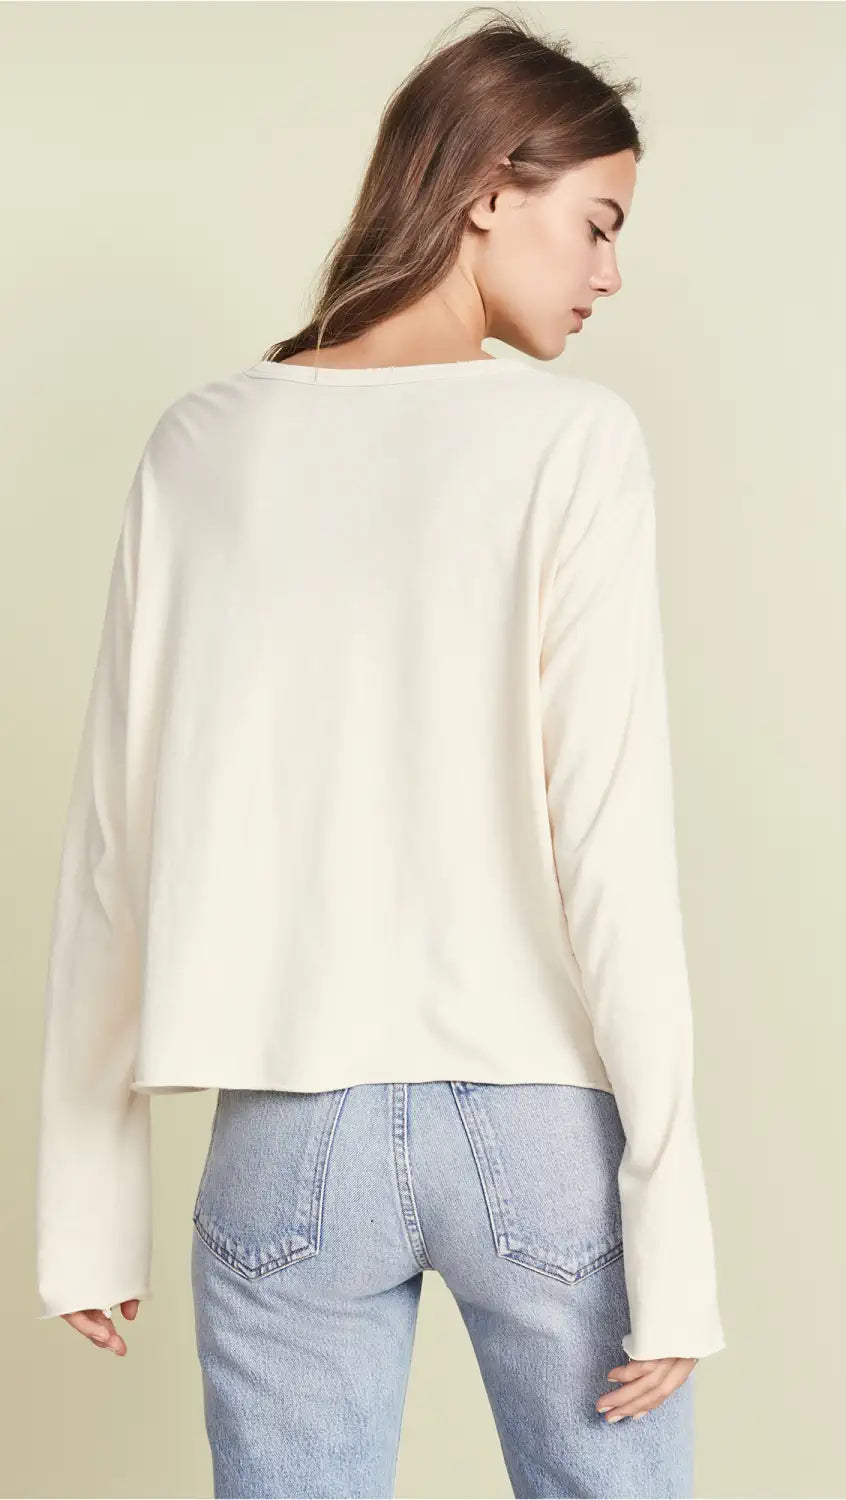 The Great - The Long Sleeve Crop Tee in Washed White